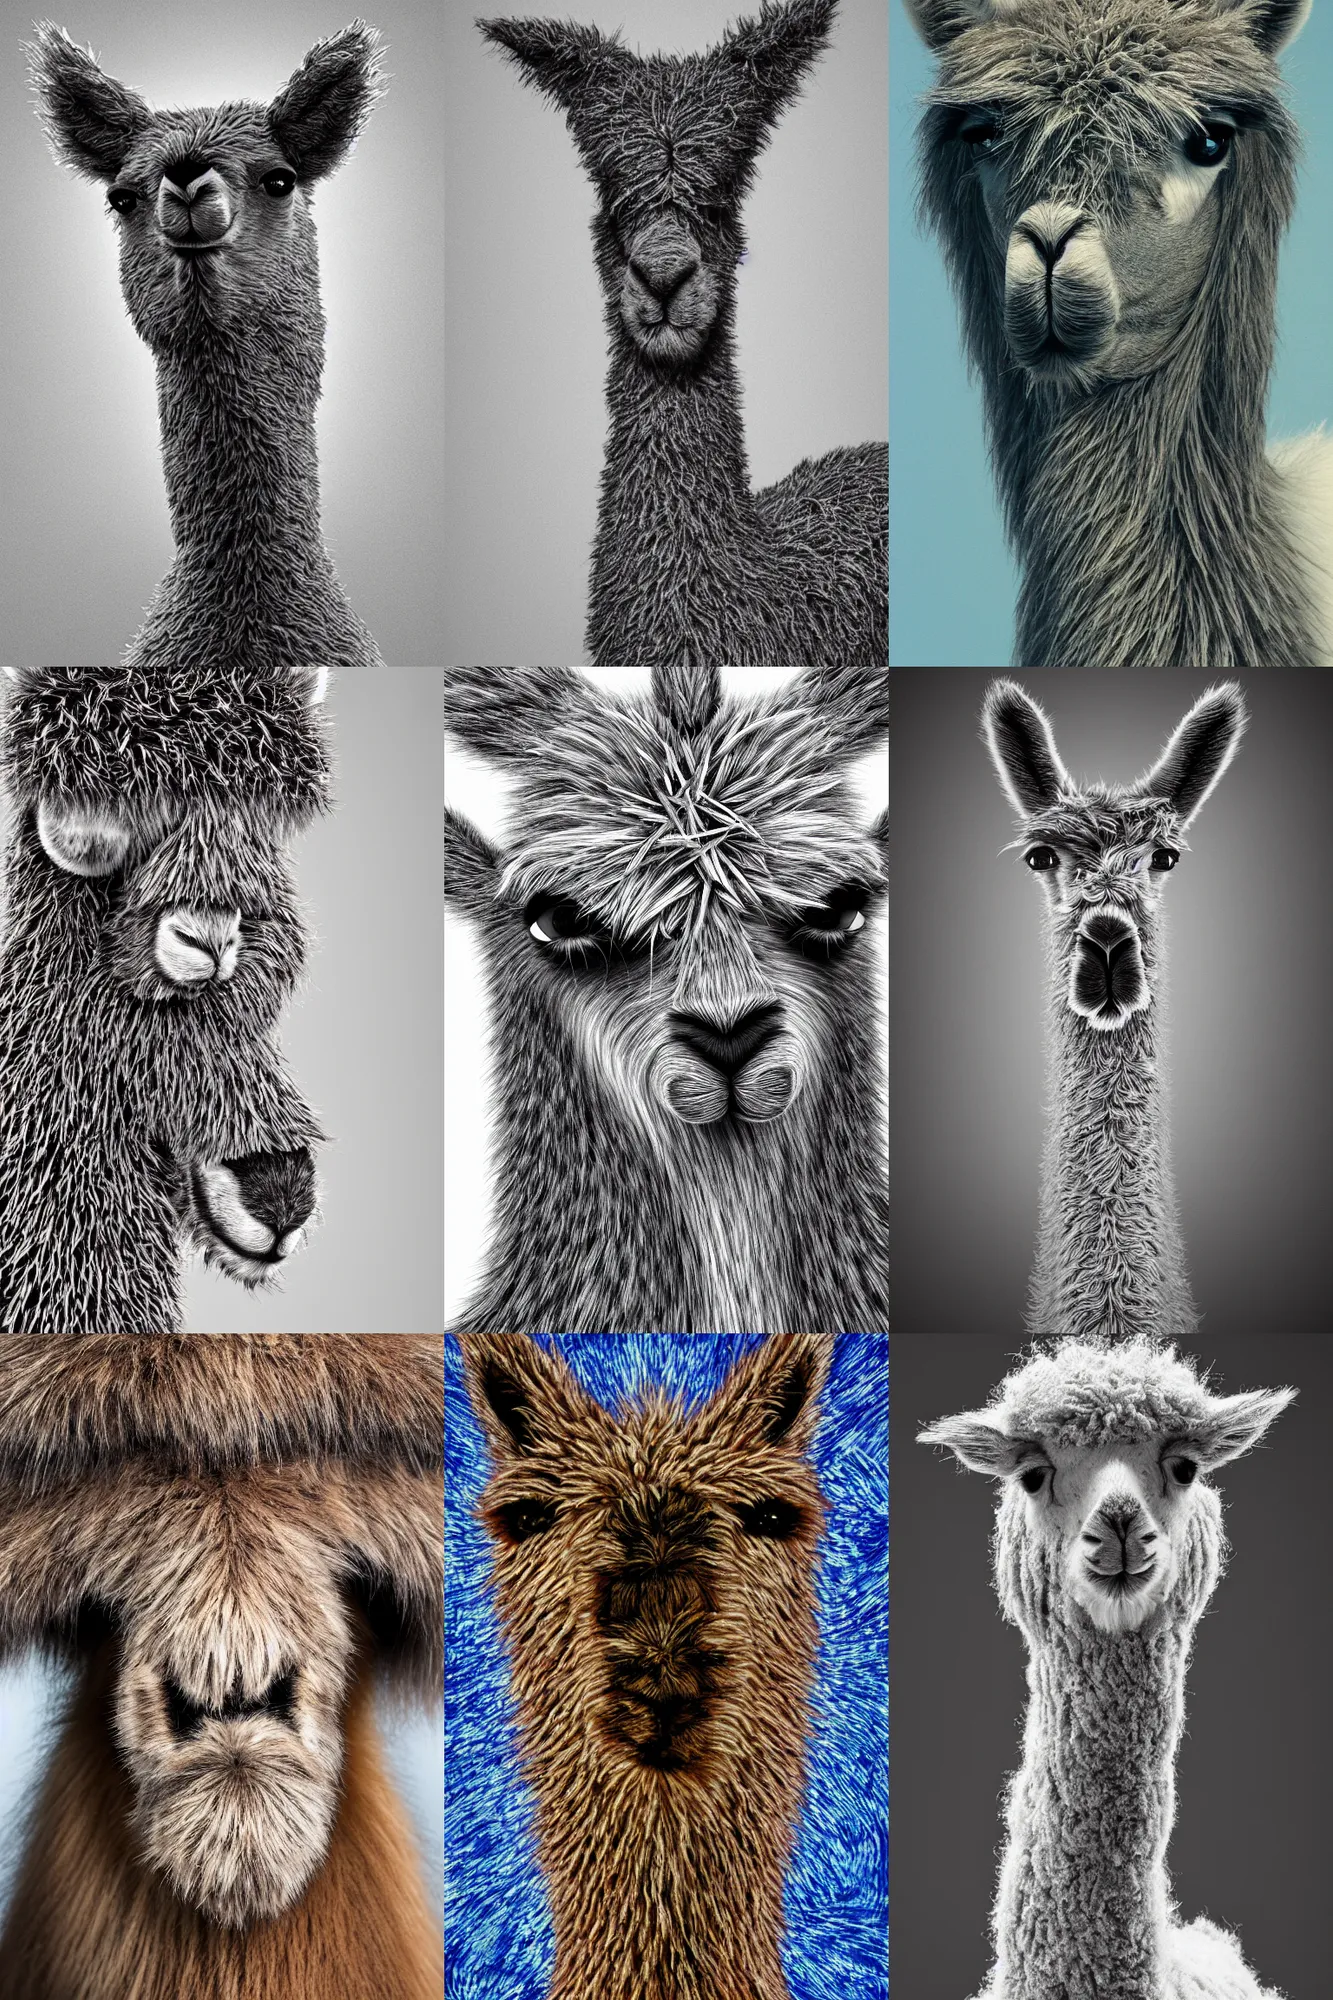 Prompt: Scanning tunneling microscope image highly rhythmic expressionistic wild symmetrical nano-scale sculpture furry llama portrait in Scanning tunneling microscope, HQ 8k scan